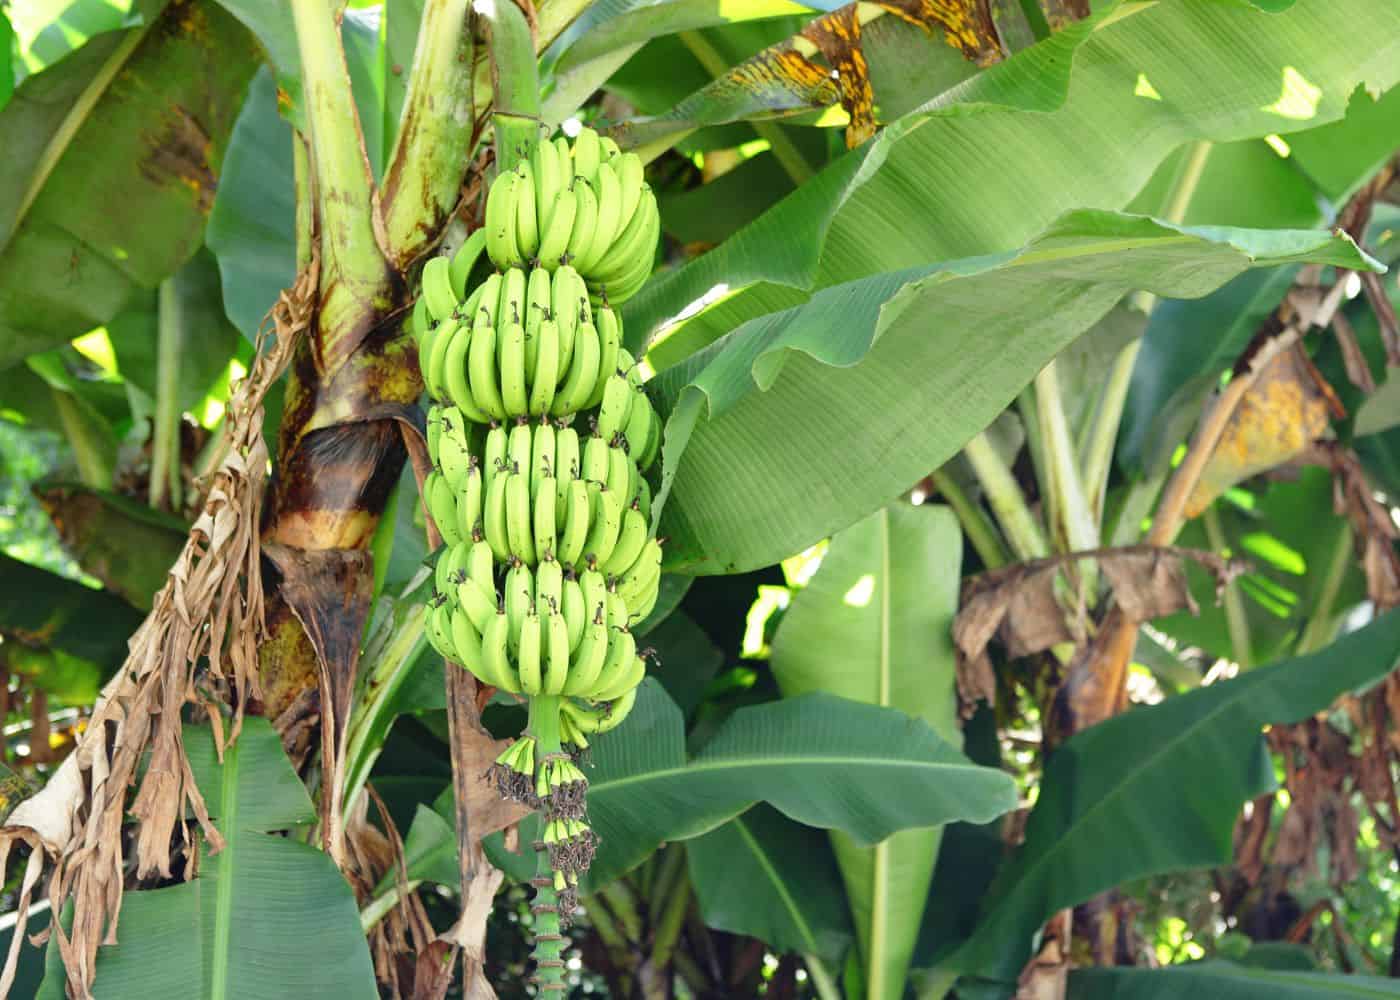 Tree with bananas hanging